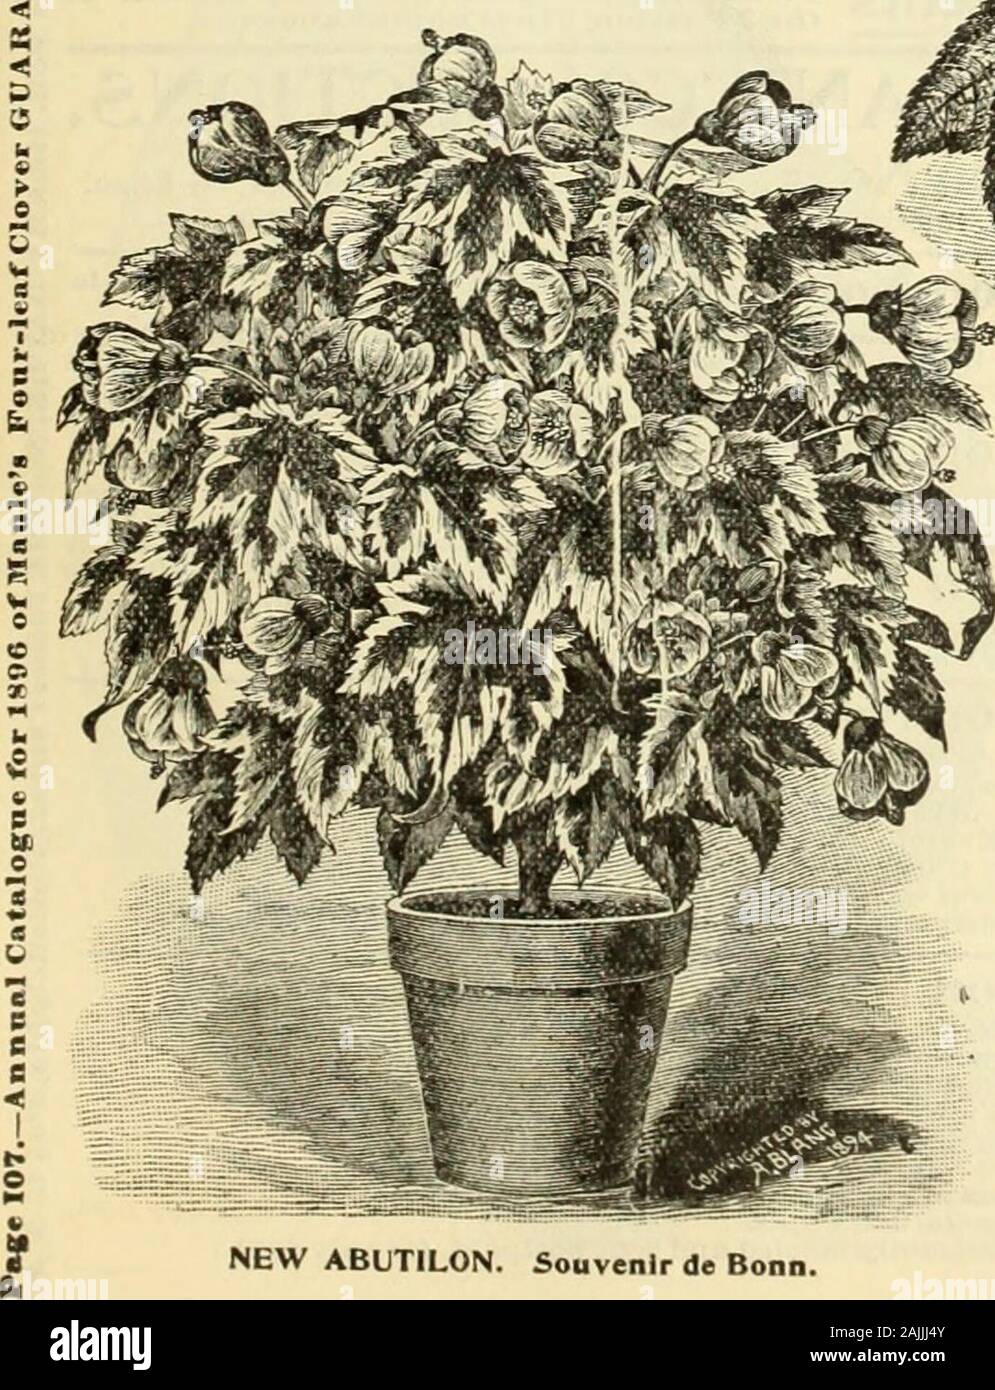 Maule's seed catalogue : 1896 . „ and yellow. Flowers very large, on stems eight toS nine inches in length. Color bright orange red, very? effective with its beautifully 5 15 cents each; 2 for 25 cents. variegated foliagi. Strobilanthes Dyerianus. Caryopterls Mastacanthaa.Blue 5pir£ta. STROBILANTHES DYERIANUS.-Royal Pur-ple. A new house and bedding plant, it formea compact buph 18 inches high, with leaves 6 to 9 inches long, 3 or 4 Inches wide, and of the mostintense metallic purple color, shading into lightrose with a light green margin, a combinationunapproached by any other plant. The flowe Stock Photo